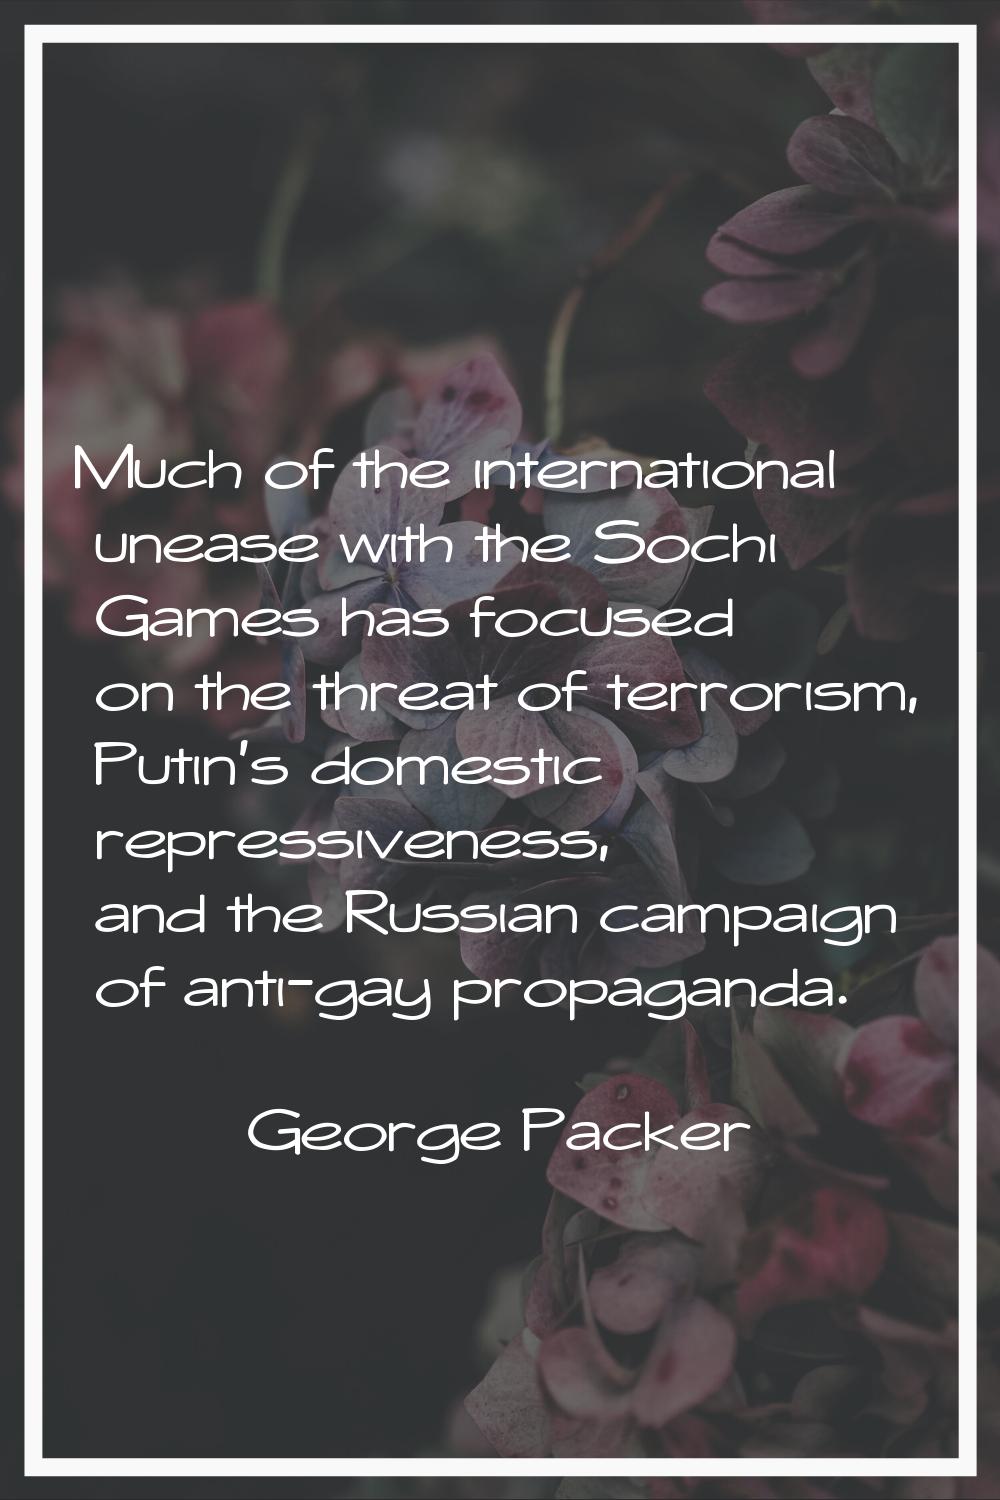 Much of the international unease with the Sochi Games has focused on the threat of terrorism, Putin